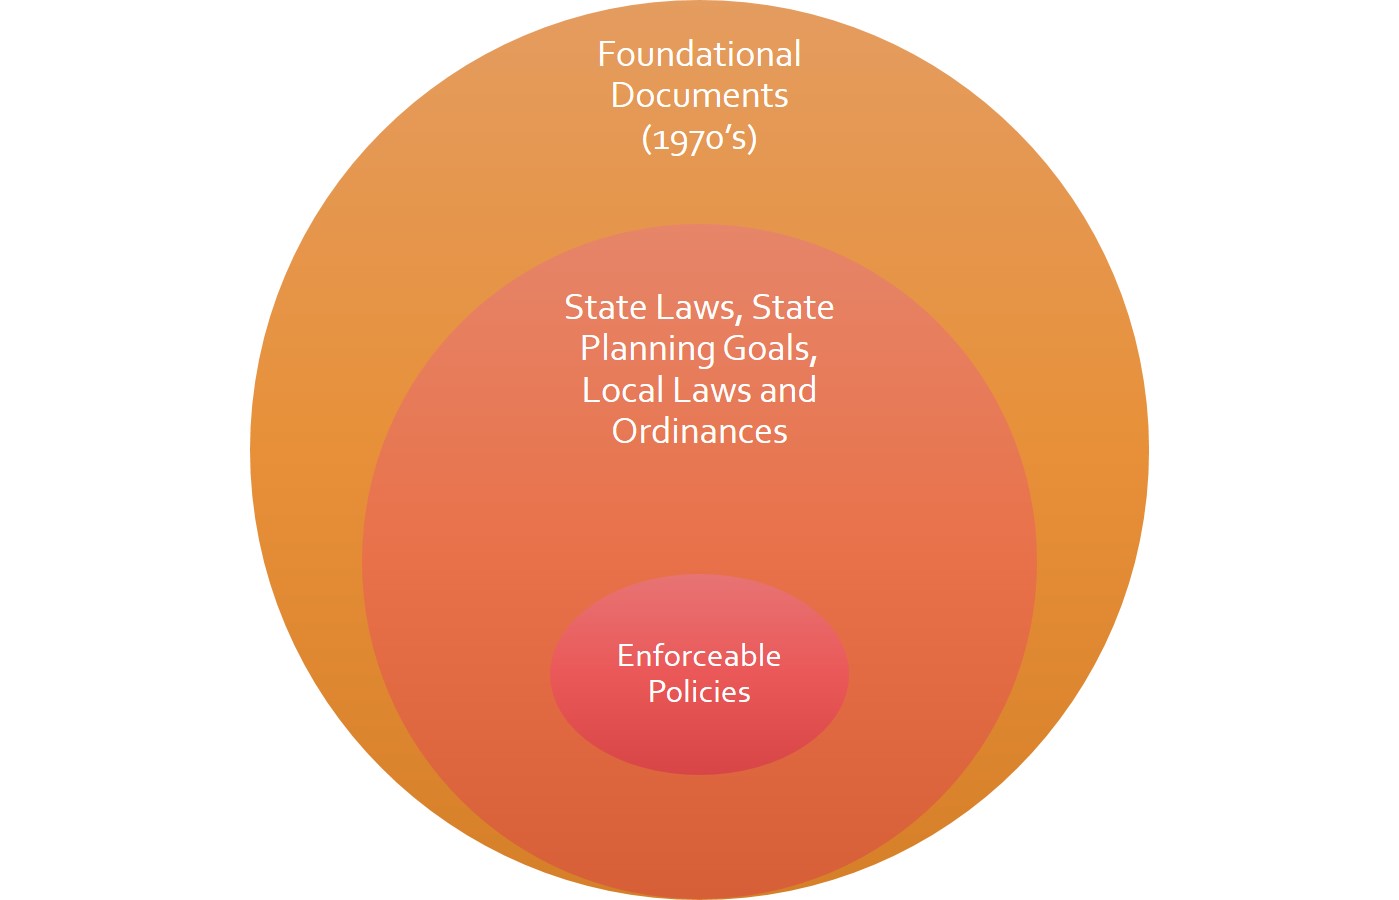 Image showing the relationship between foundational documents, state laws and goals, and enforceable policies.